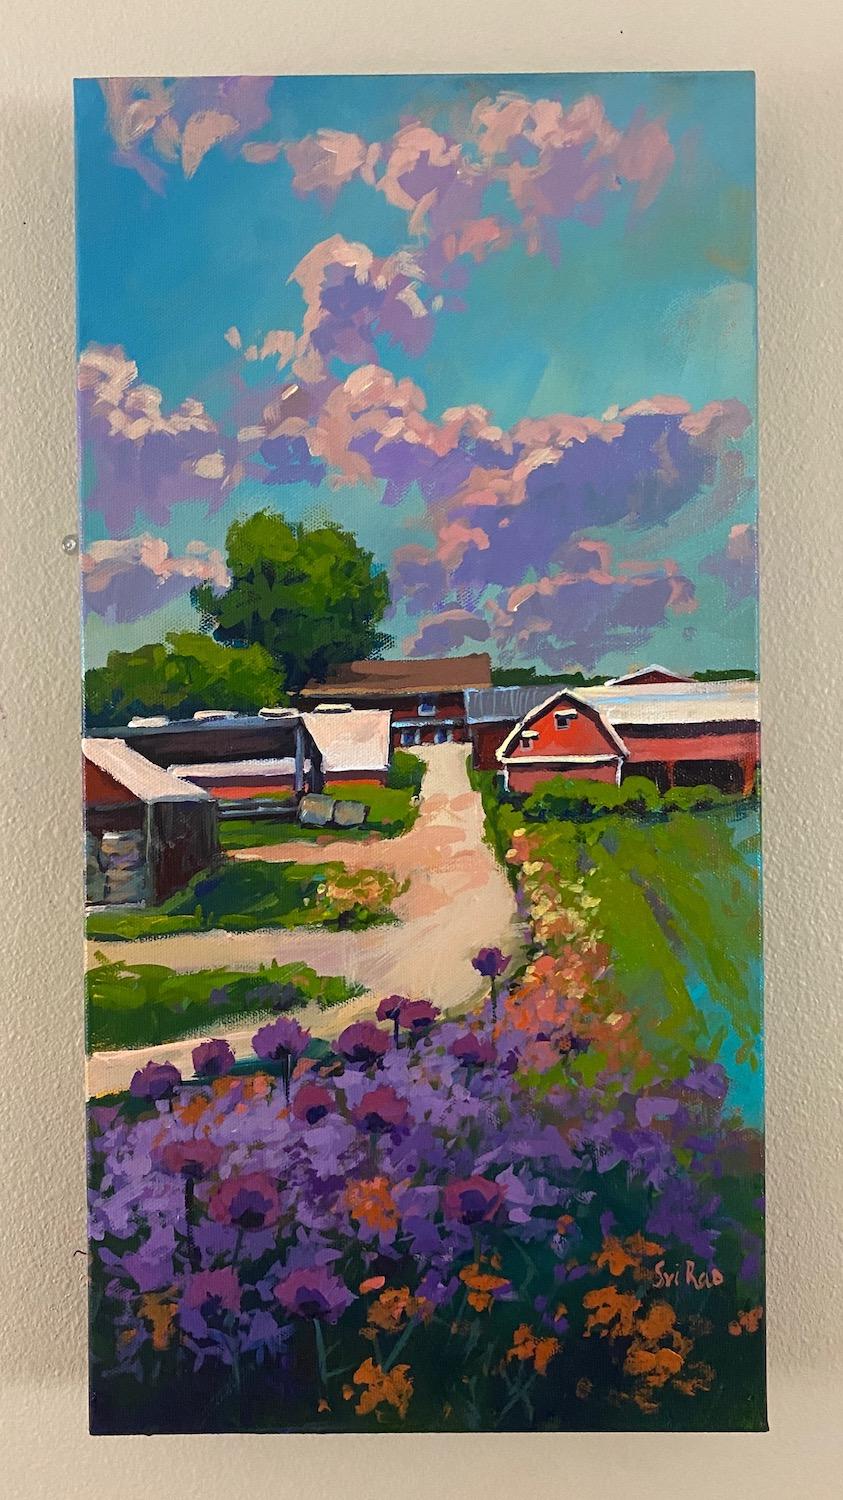 <p>Artist Comments<br>Artist Sri Rao depicts a beautiful spring day where purple flowers line the path toward a red barn. The petals mirror the soft, dreamy clouds in the sky, creating a harmonious dance of colors and nature's beauty. The artwork